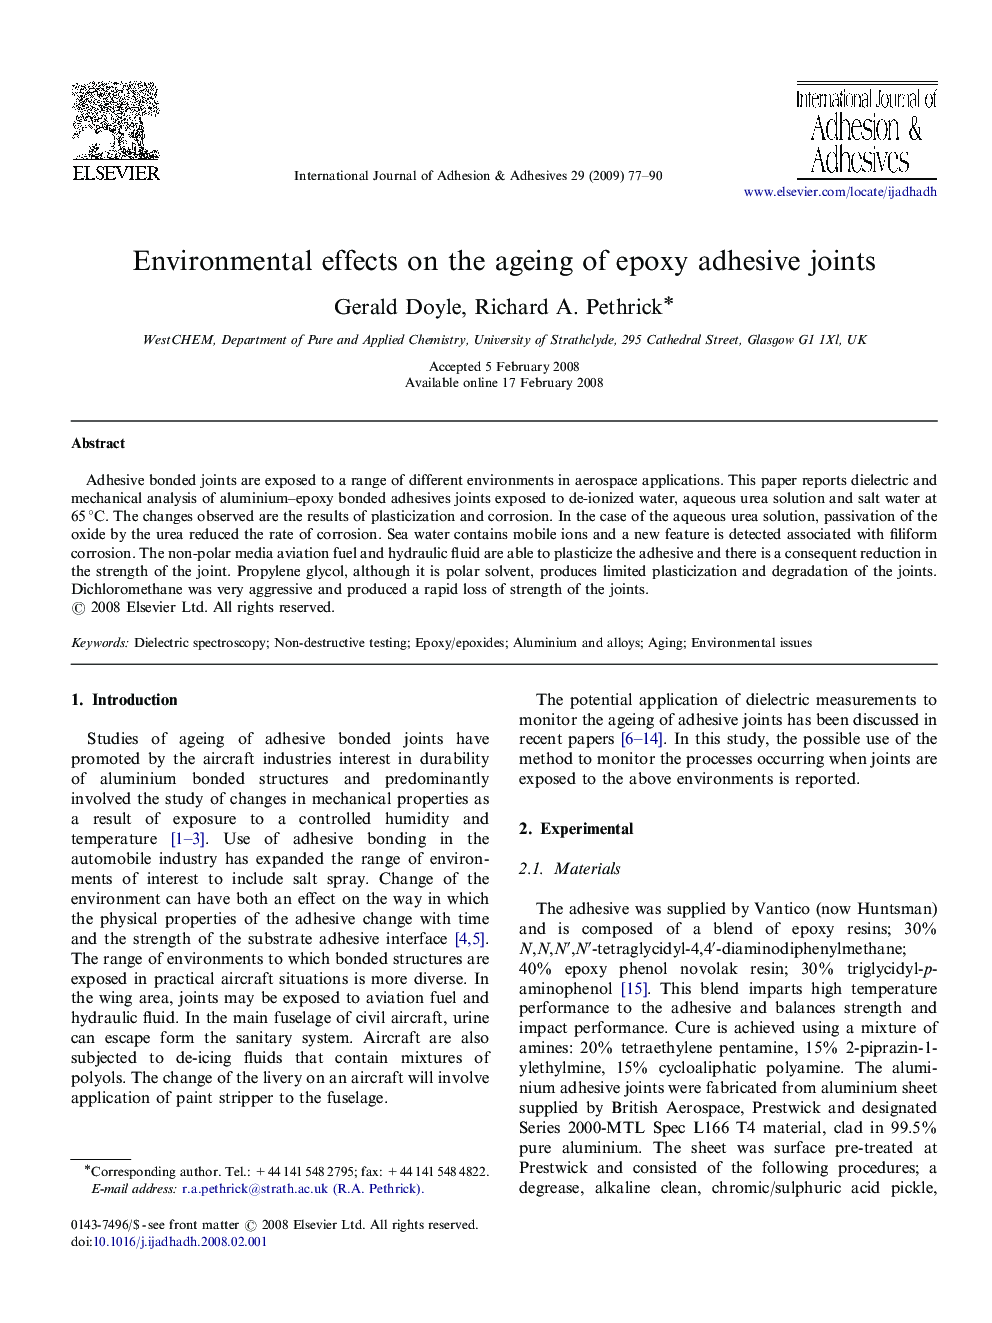 Environmental effects on the ageing of epoxy adhesive joints